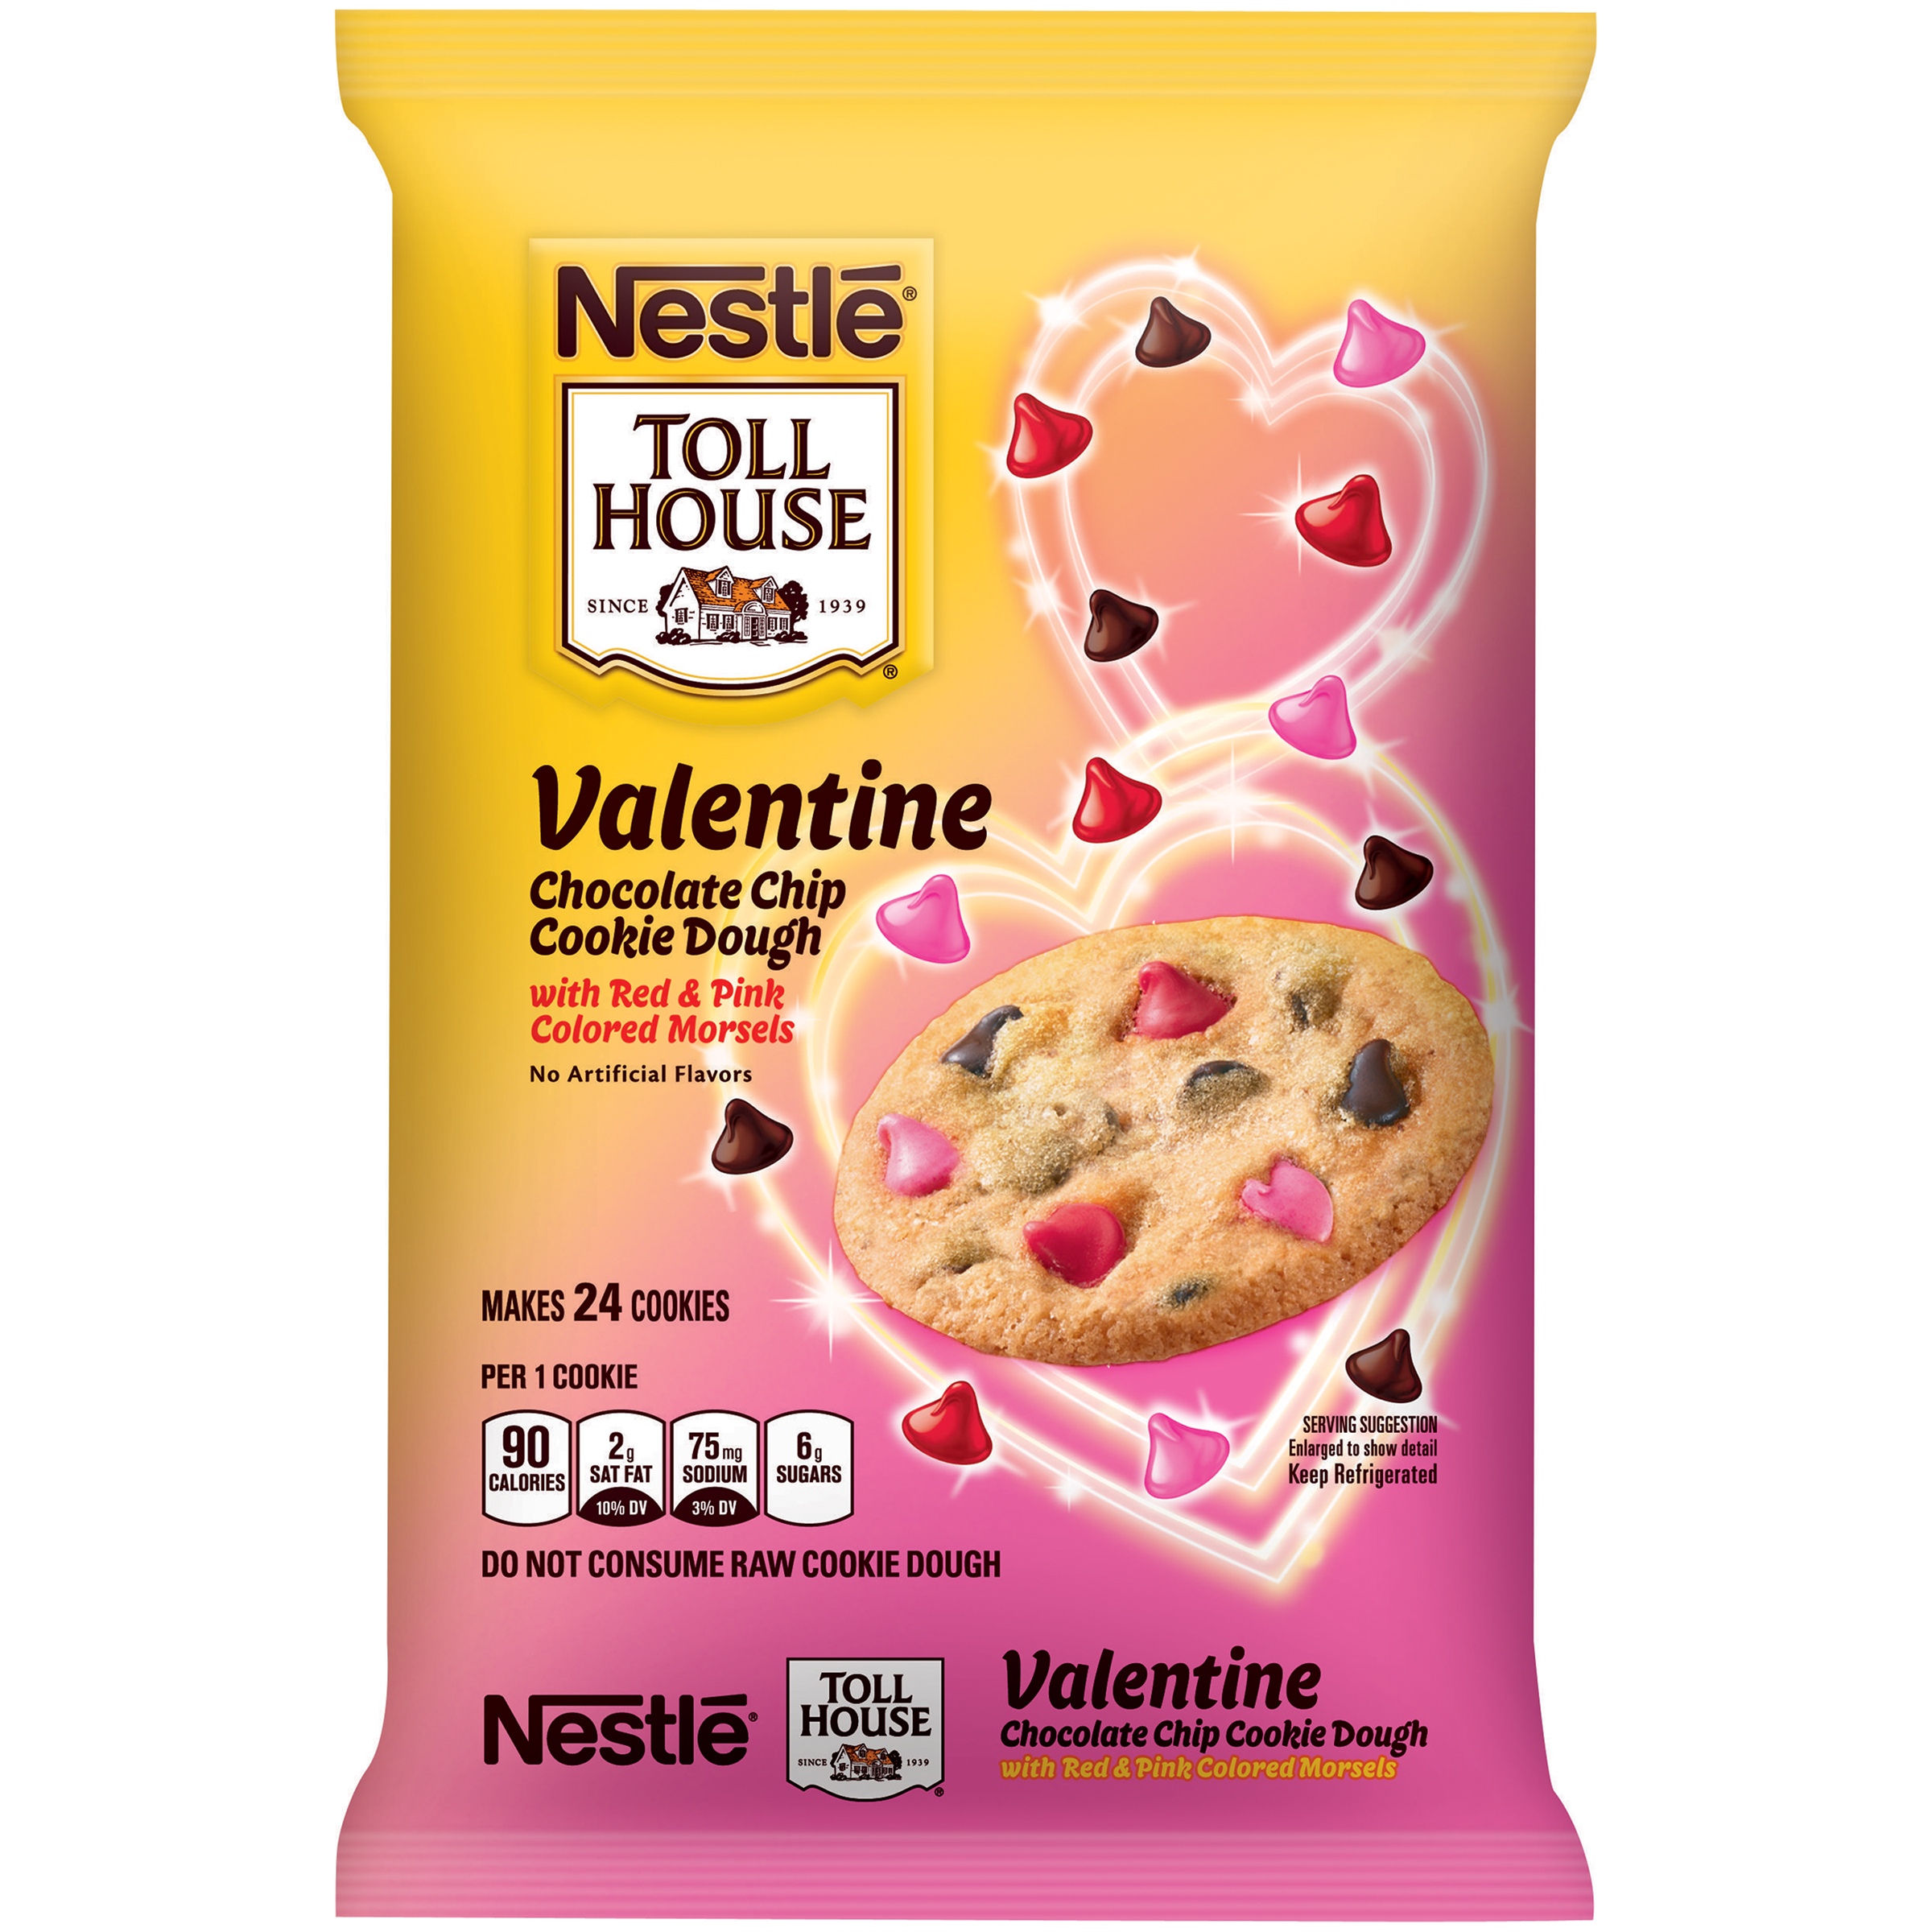 NESTLE TOLL HOUSE Valentine Chocolate Chip Cookie Dough 16 oz. Pack - image 1 of 10